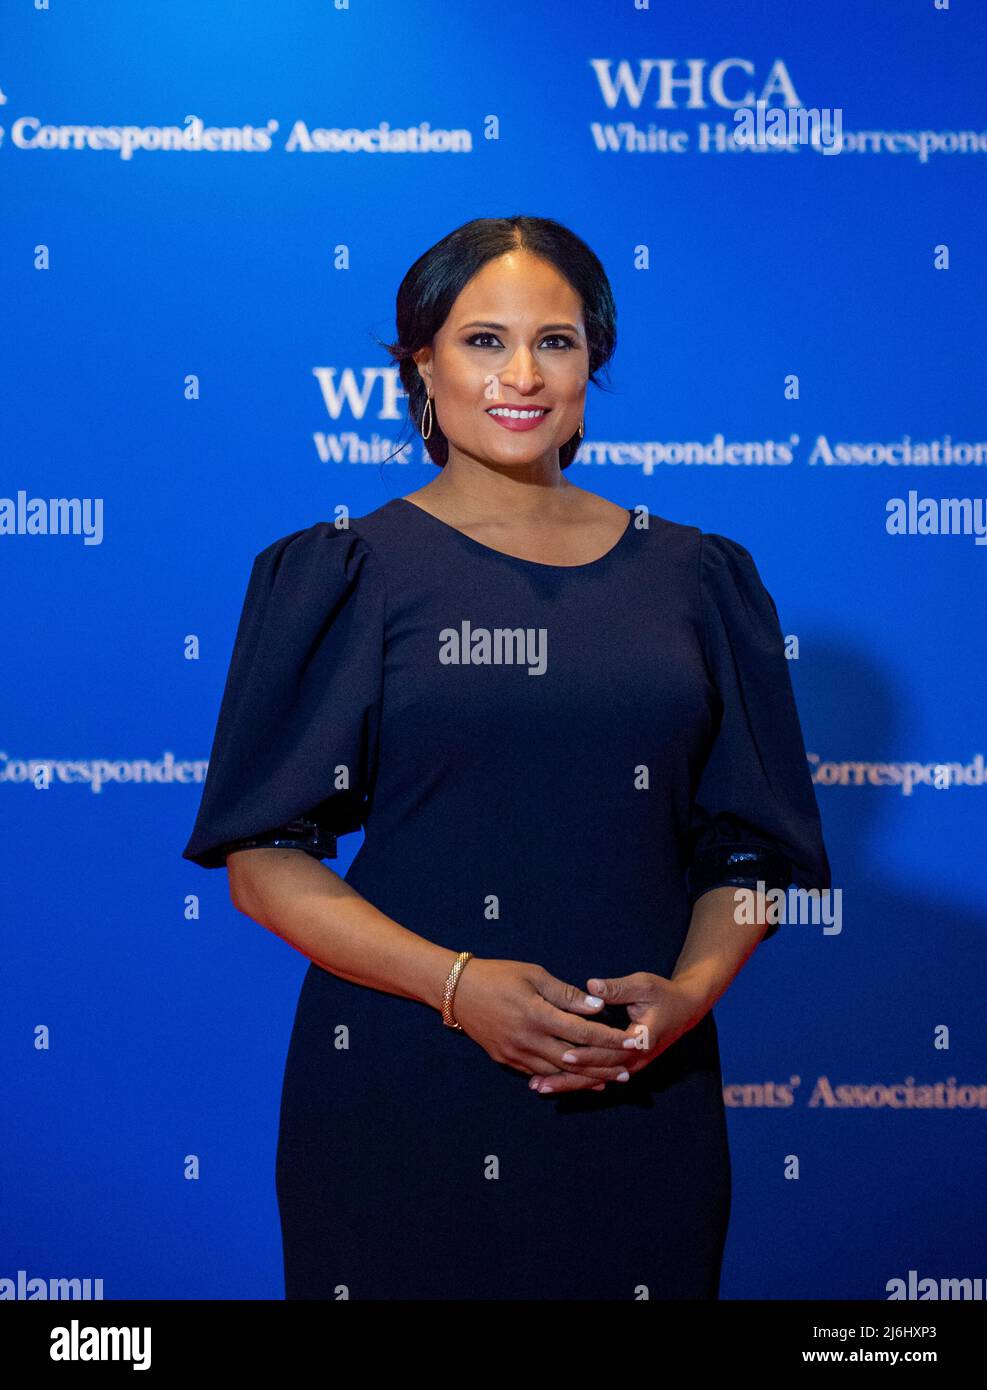 Kristen Welker arrives for the 2022 White House Correspondents Association Annual Dinner at the Washington Hilton Hotel on Saturday, April 30, 2022. This is the first time since 2019 that the WHCA has held its annual dinner due to the COVID-19 pandemic. Photo by Rod Lamkey/CNP/ABACAPRESS.COM Stock Photo